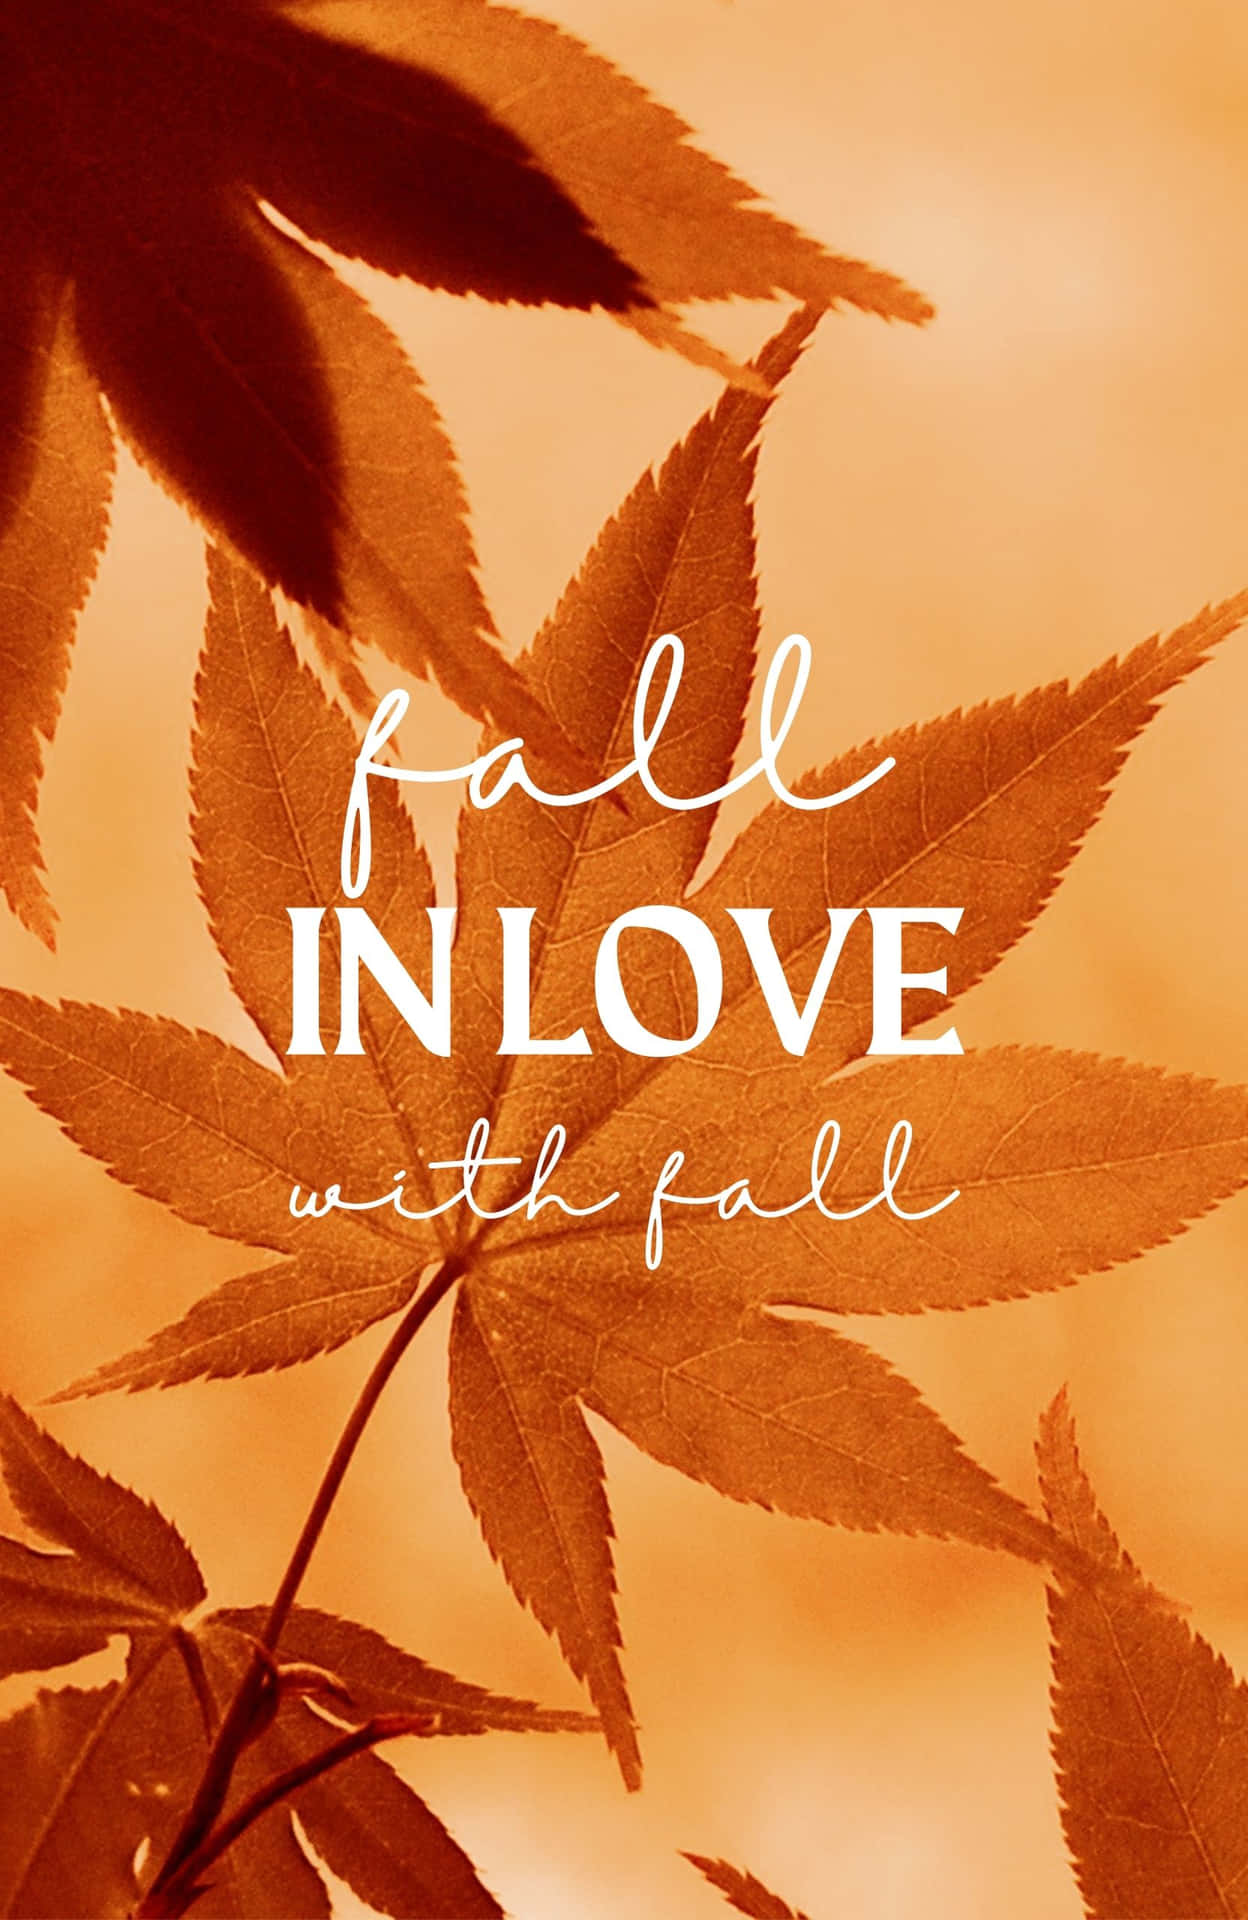 Take a stroll outdoors and enjoy the beauty of the best fall!